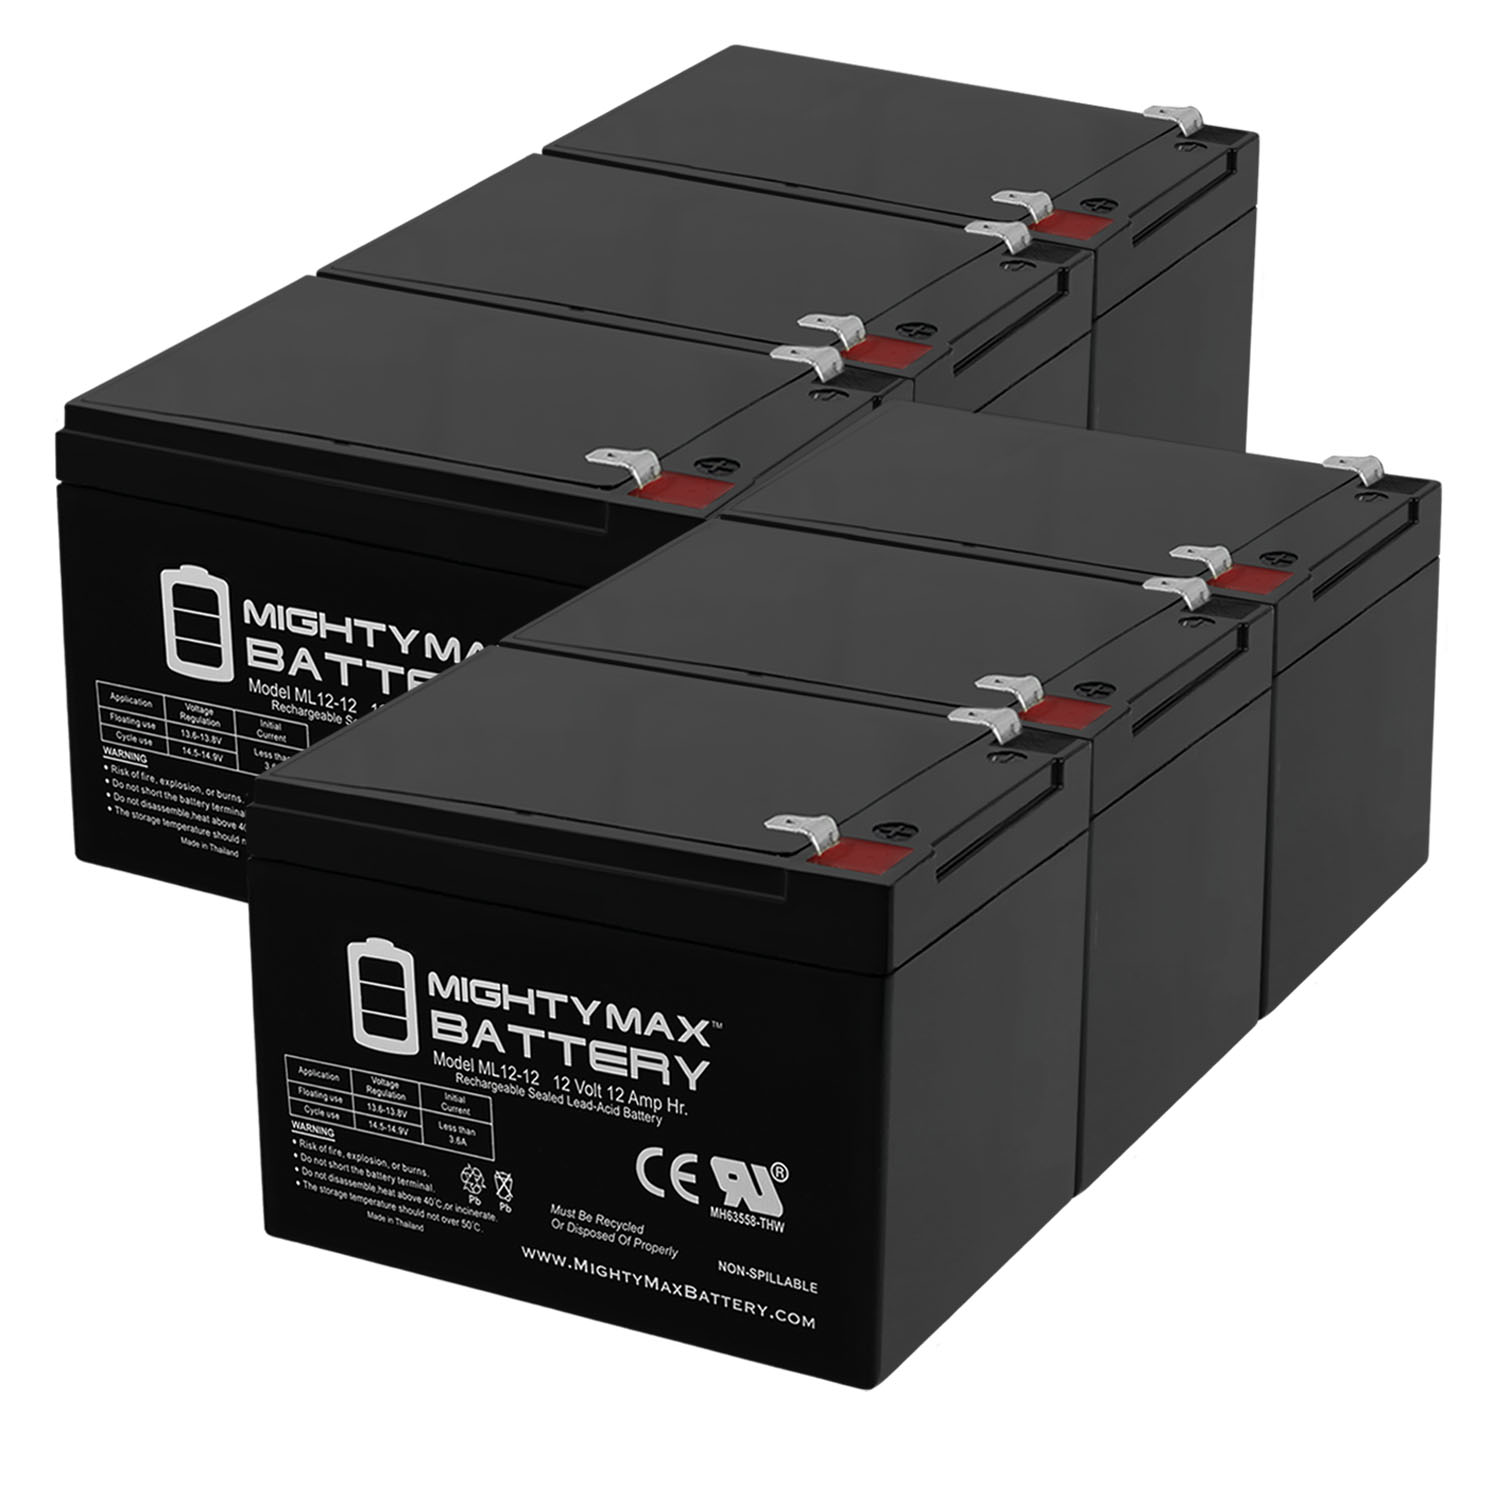 12V 12Ah F2 SLA Replacement Battery compatible with Belkin F6C1000ei-TW-RK - 6 Pack